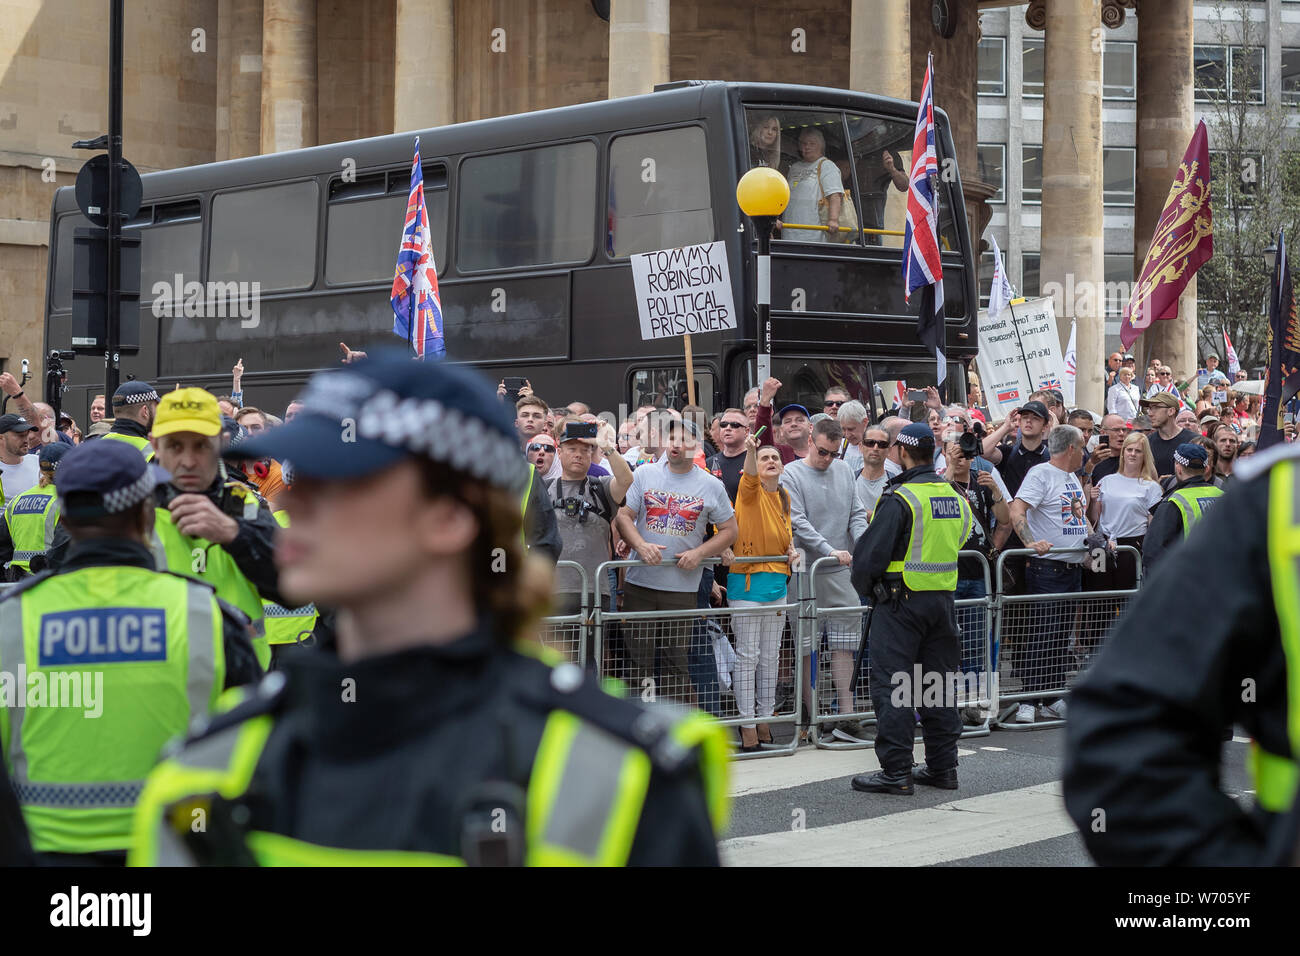 London, UK. 3rd August, 2019. 'Free Tommy Robinson' protest. Police arrest twenty four during a mass demonstration in support of the jailed Tommy Robinson, real name Stephen Yaxley-Lennon, who was sentenced last month to nine months in prison after being found guilty in contempt of court. Counter-protesters including antifascist activists and the anti-racist group: Stand Up to Racism, opposed the pro-Robinson demonstrators with protest groups kept apart by met police with some clashes. Credit: Guy Corbishley/Alamy Live News Stock Photo